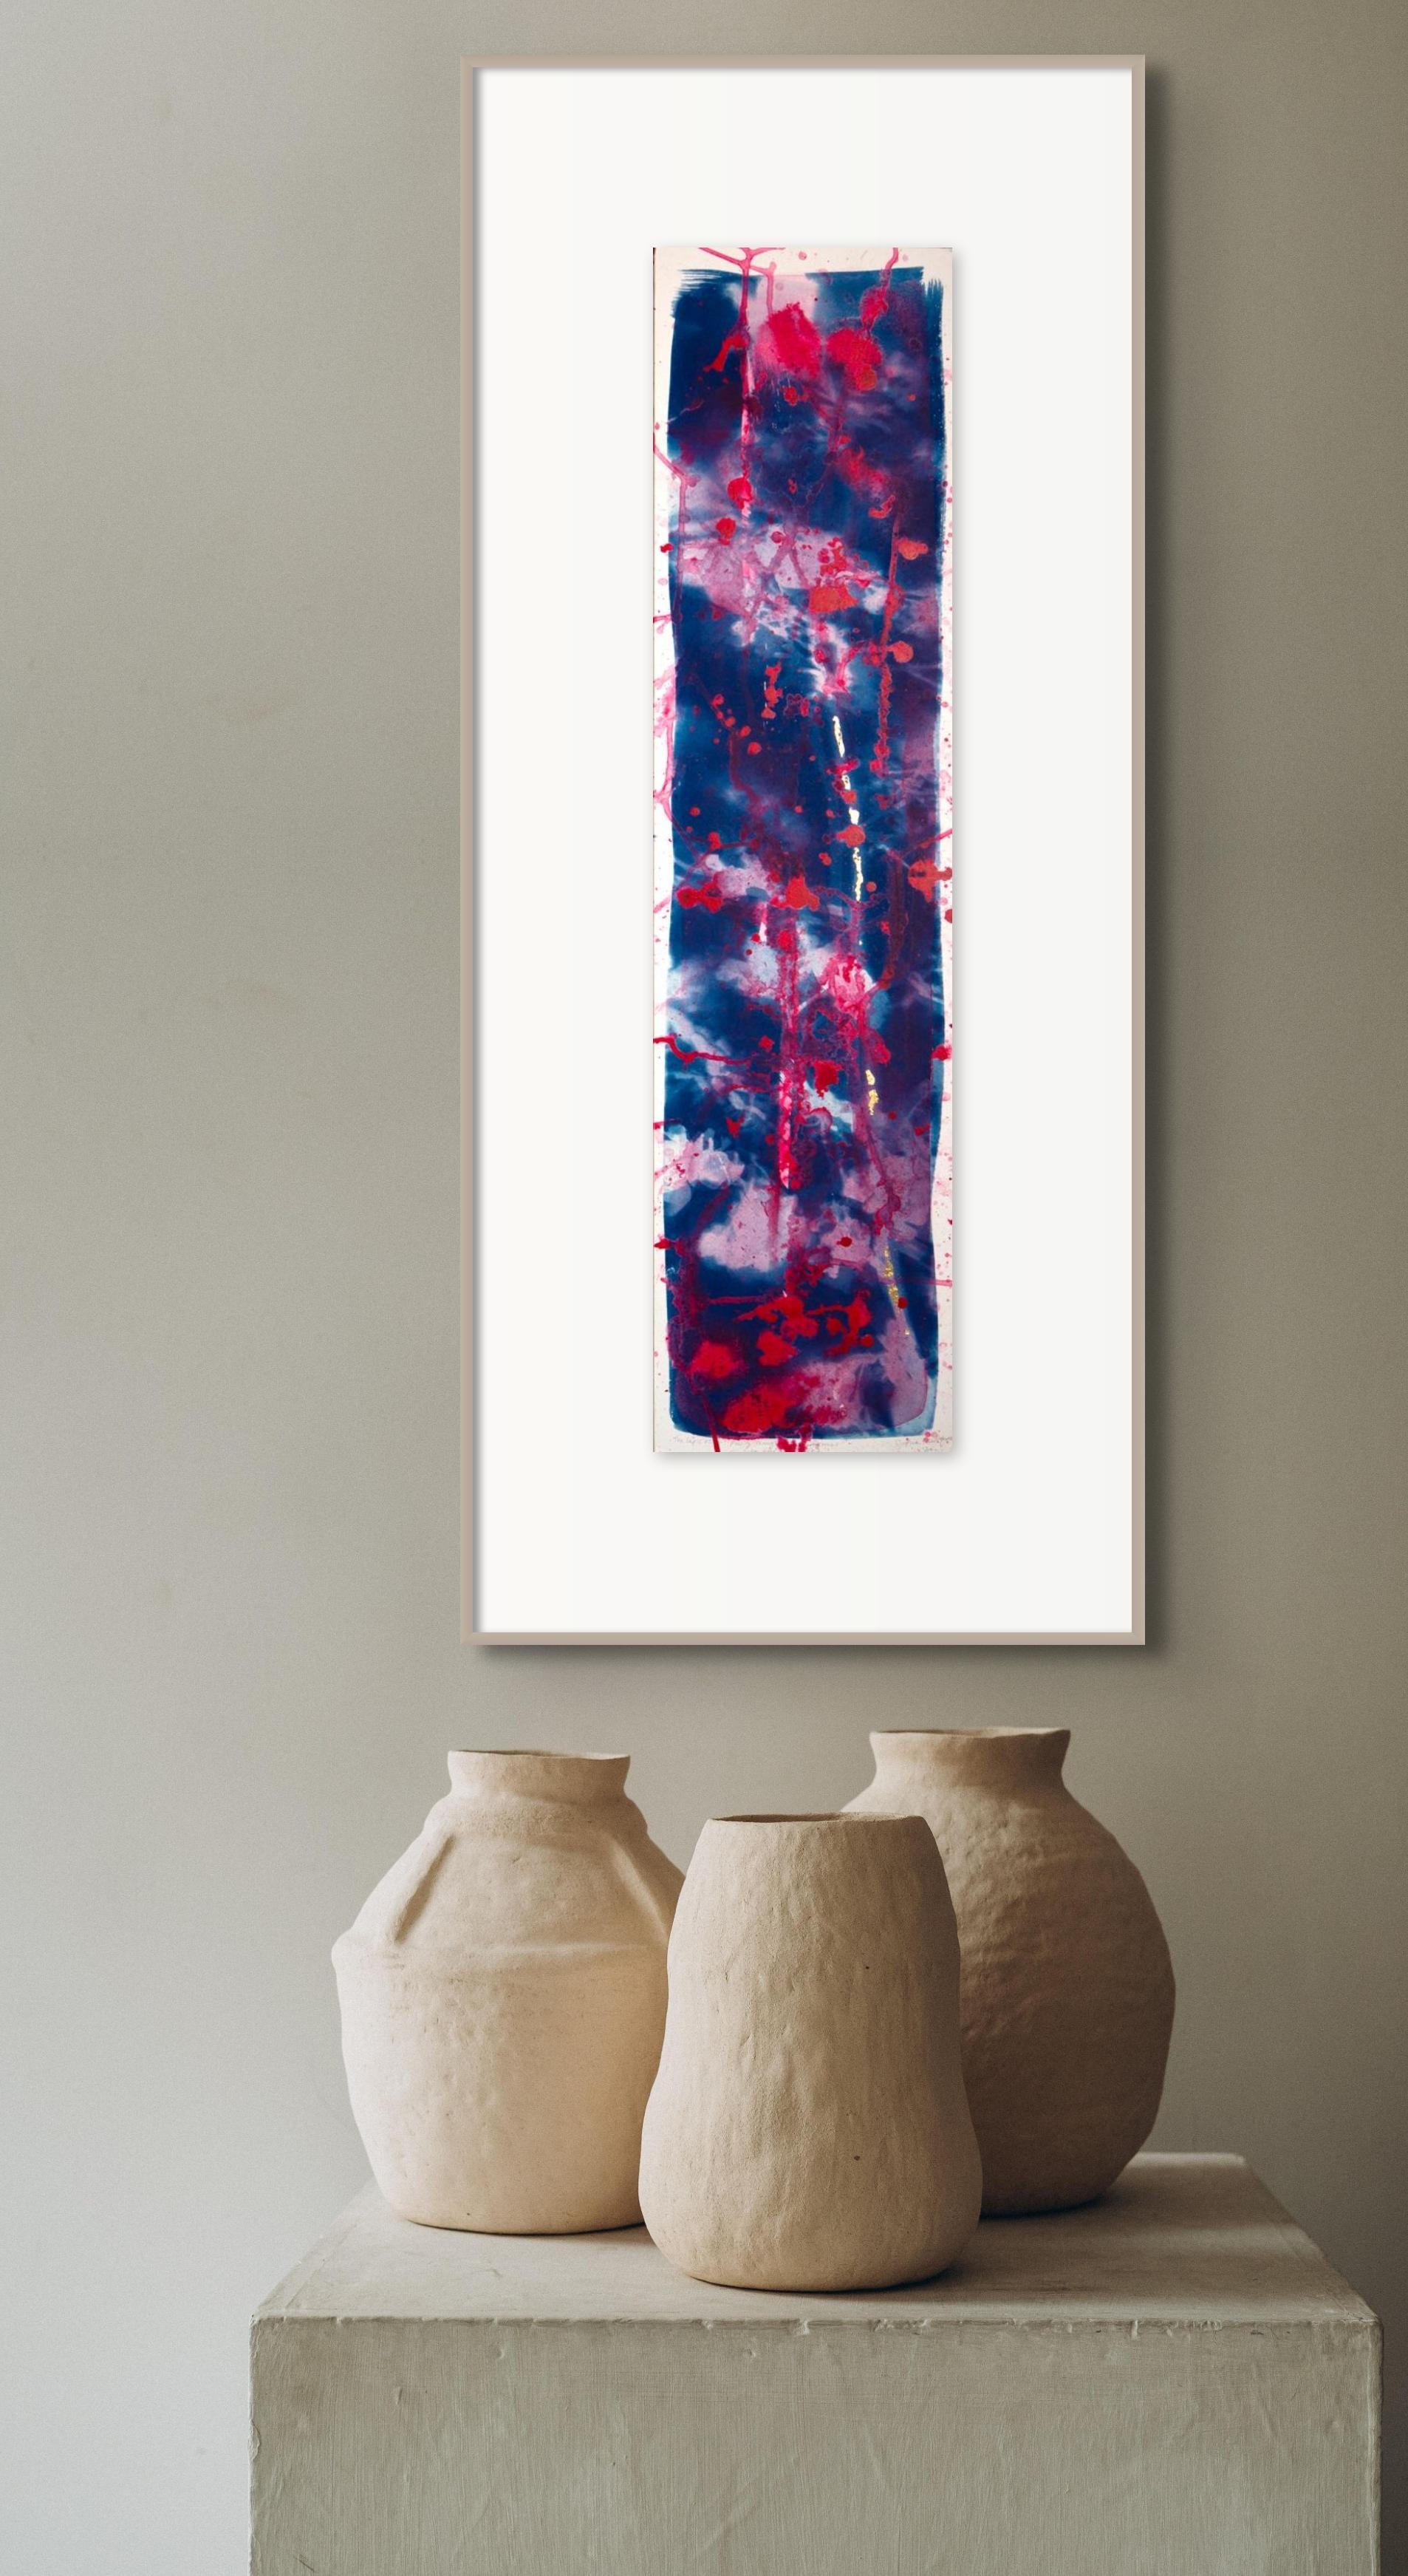 'Blood in the Veins'. Cherry blossom pink white blue magenta abstract sakura - Art by Sophia Milligan